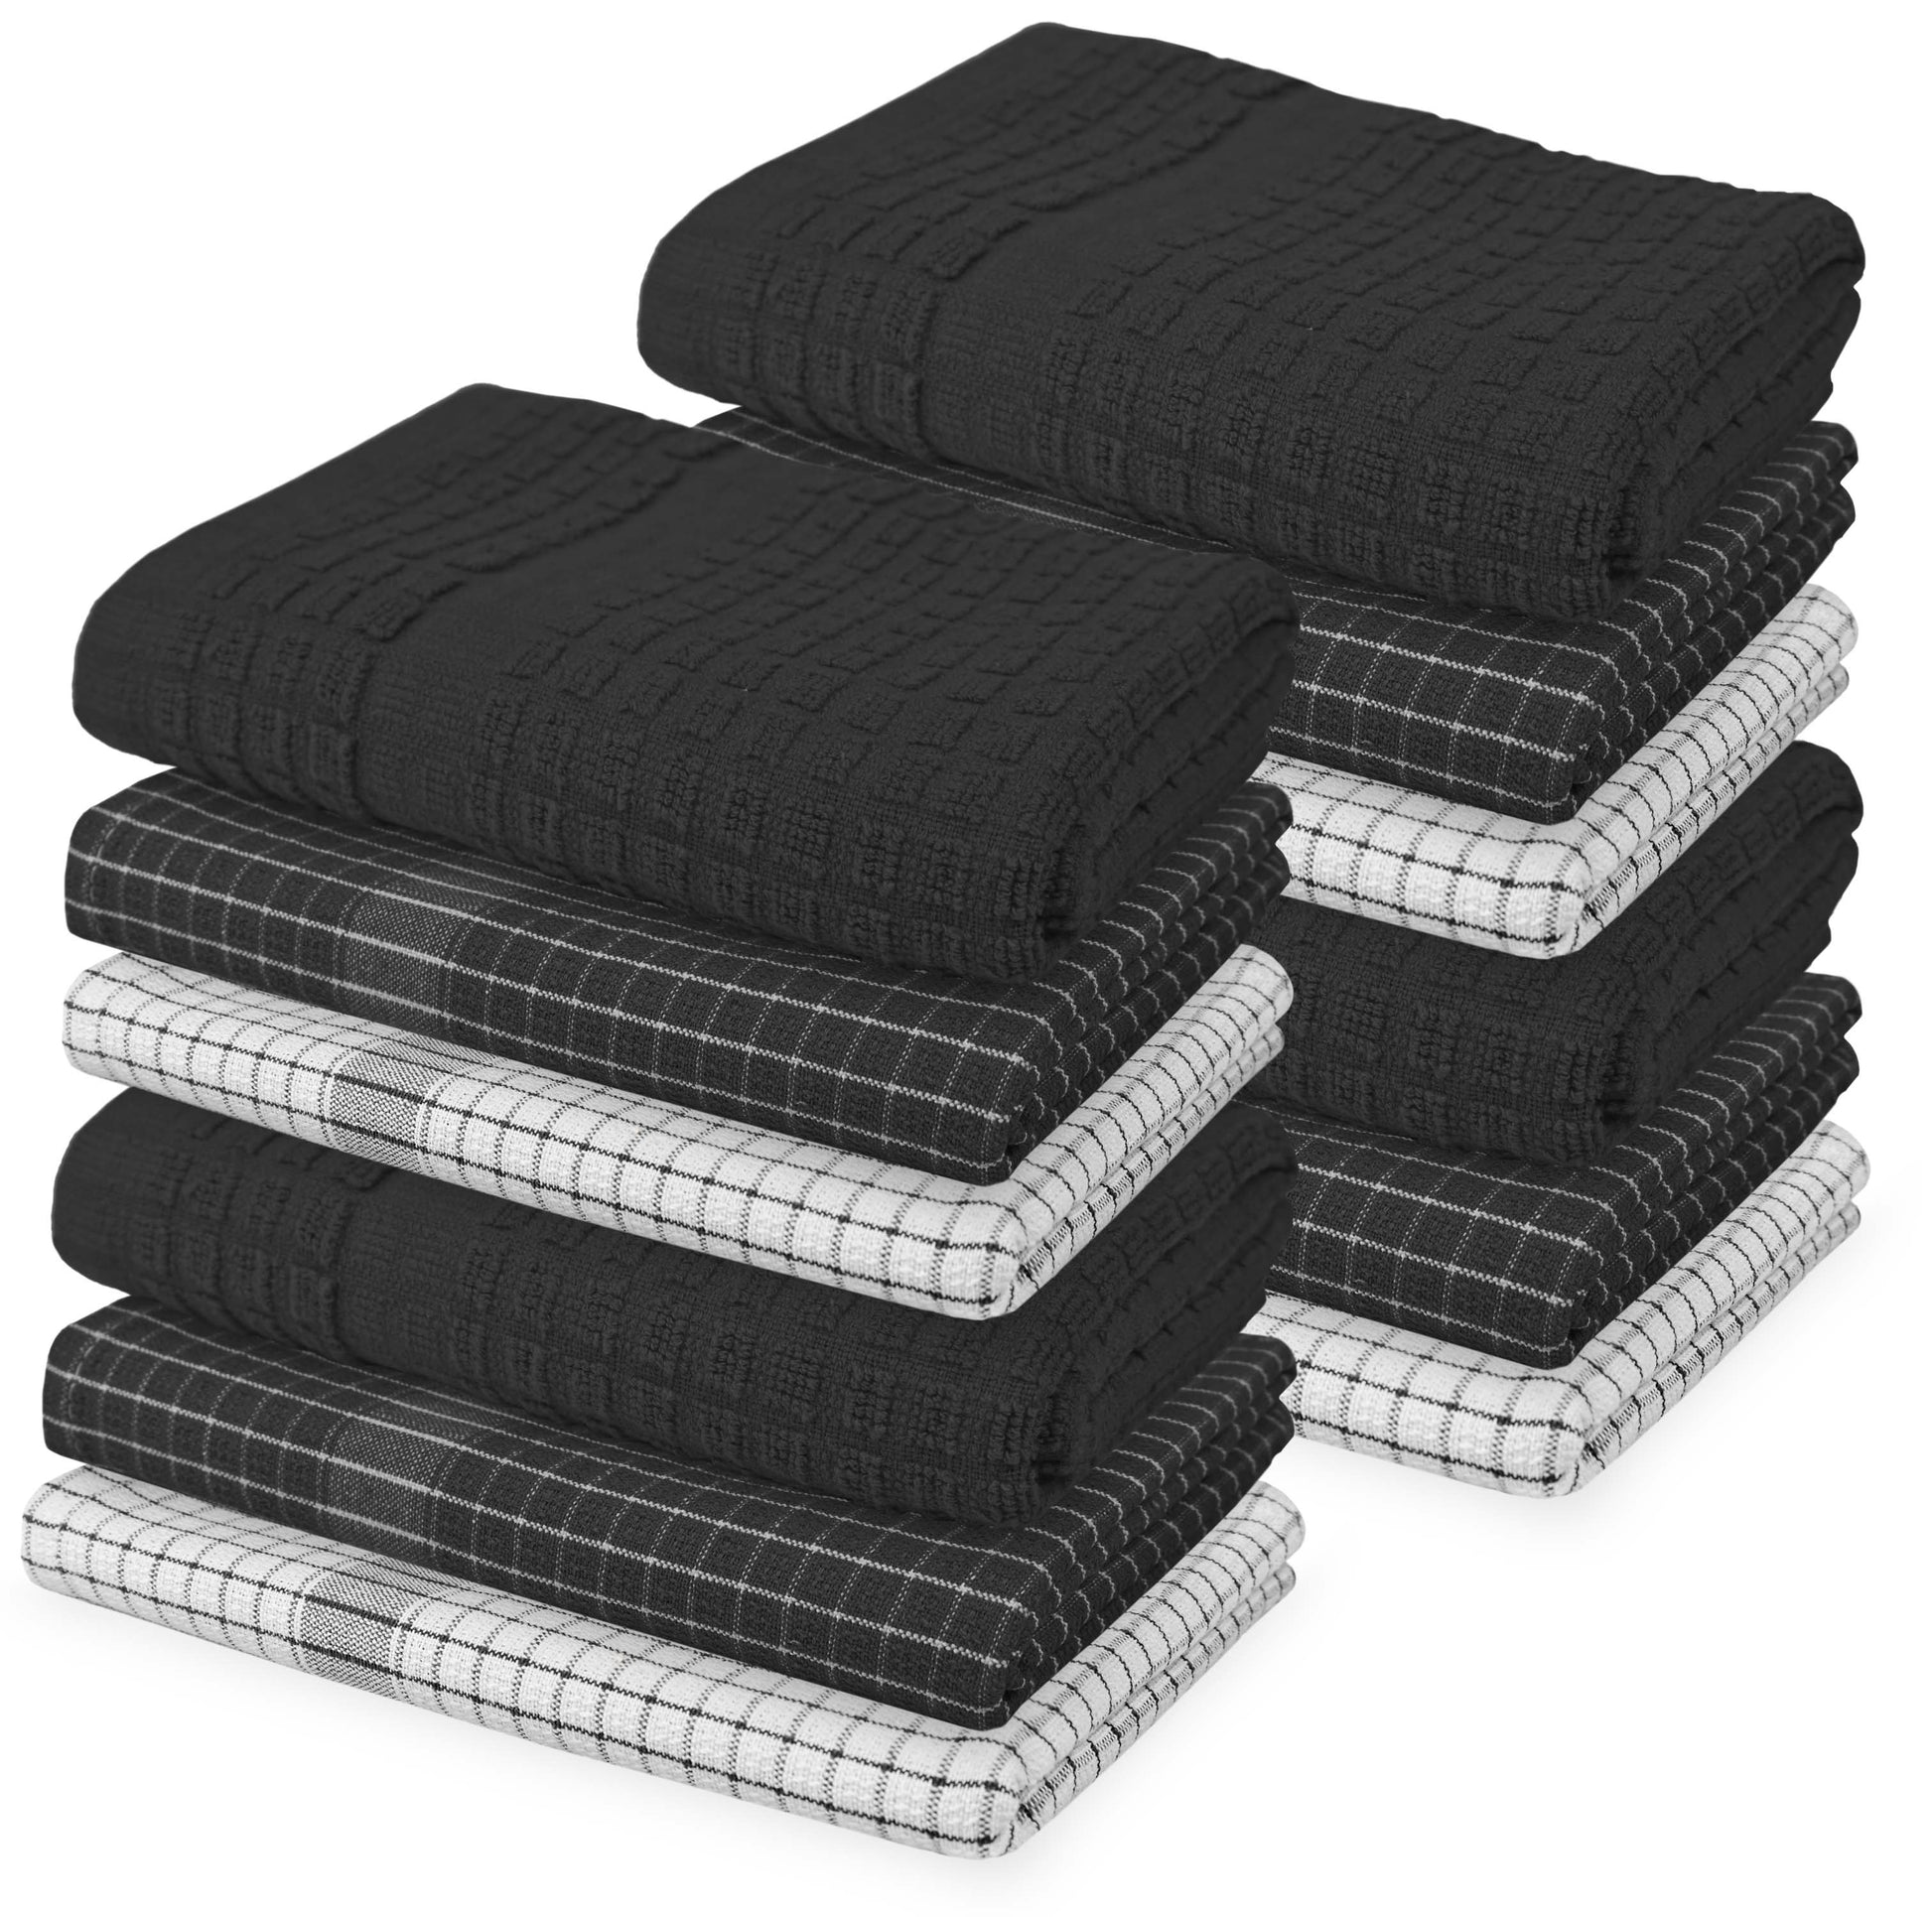  XLNT Black Kitchen Towels (3 Pack) - 100% Cotton Dish Towels, Durable, Ultra Absorbent Dishcloths Sets of Hand Towels/Tea Towels for  Everyday Scrubbing